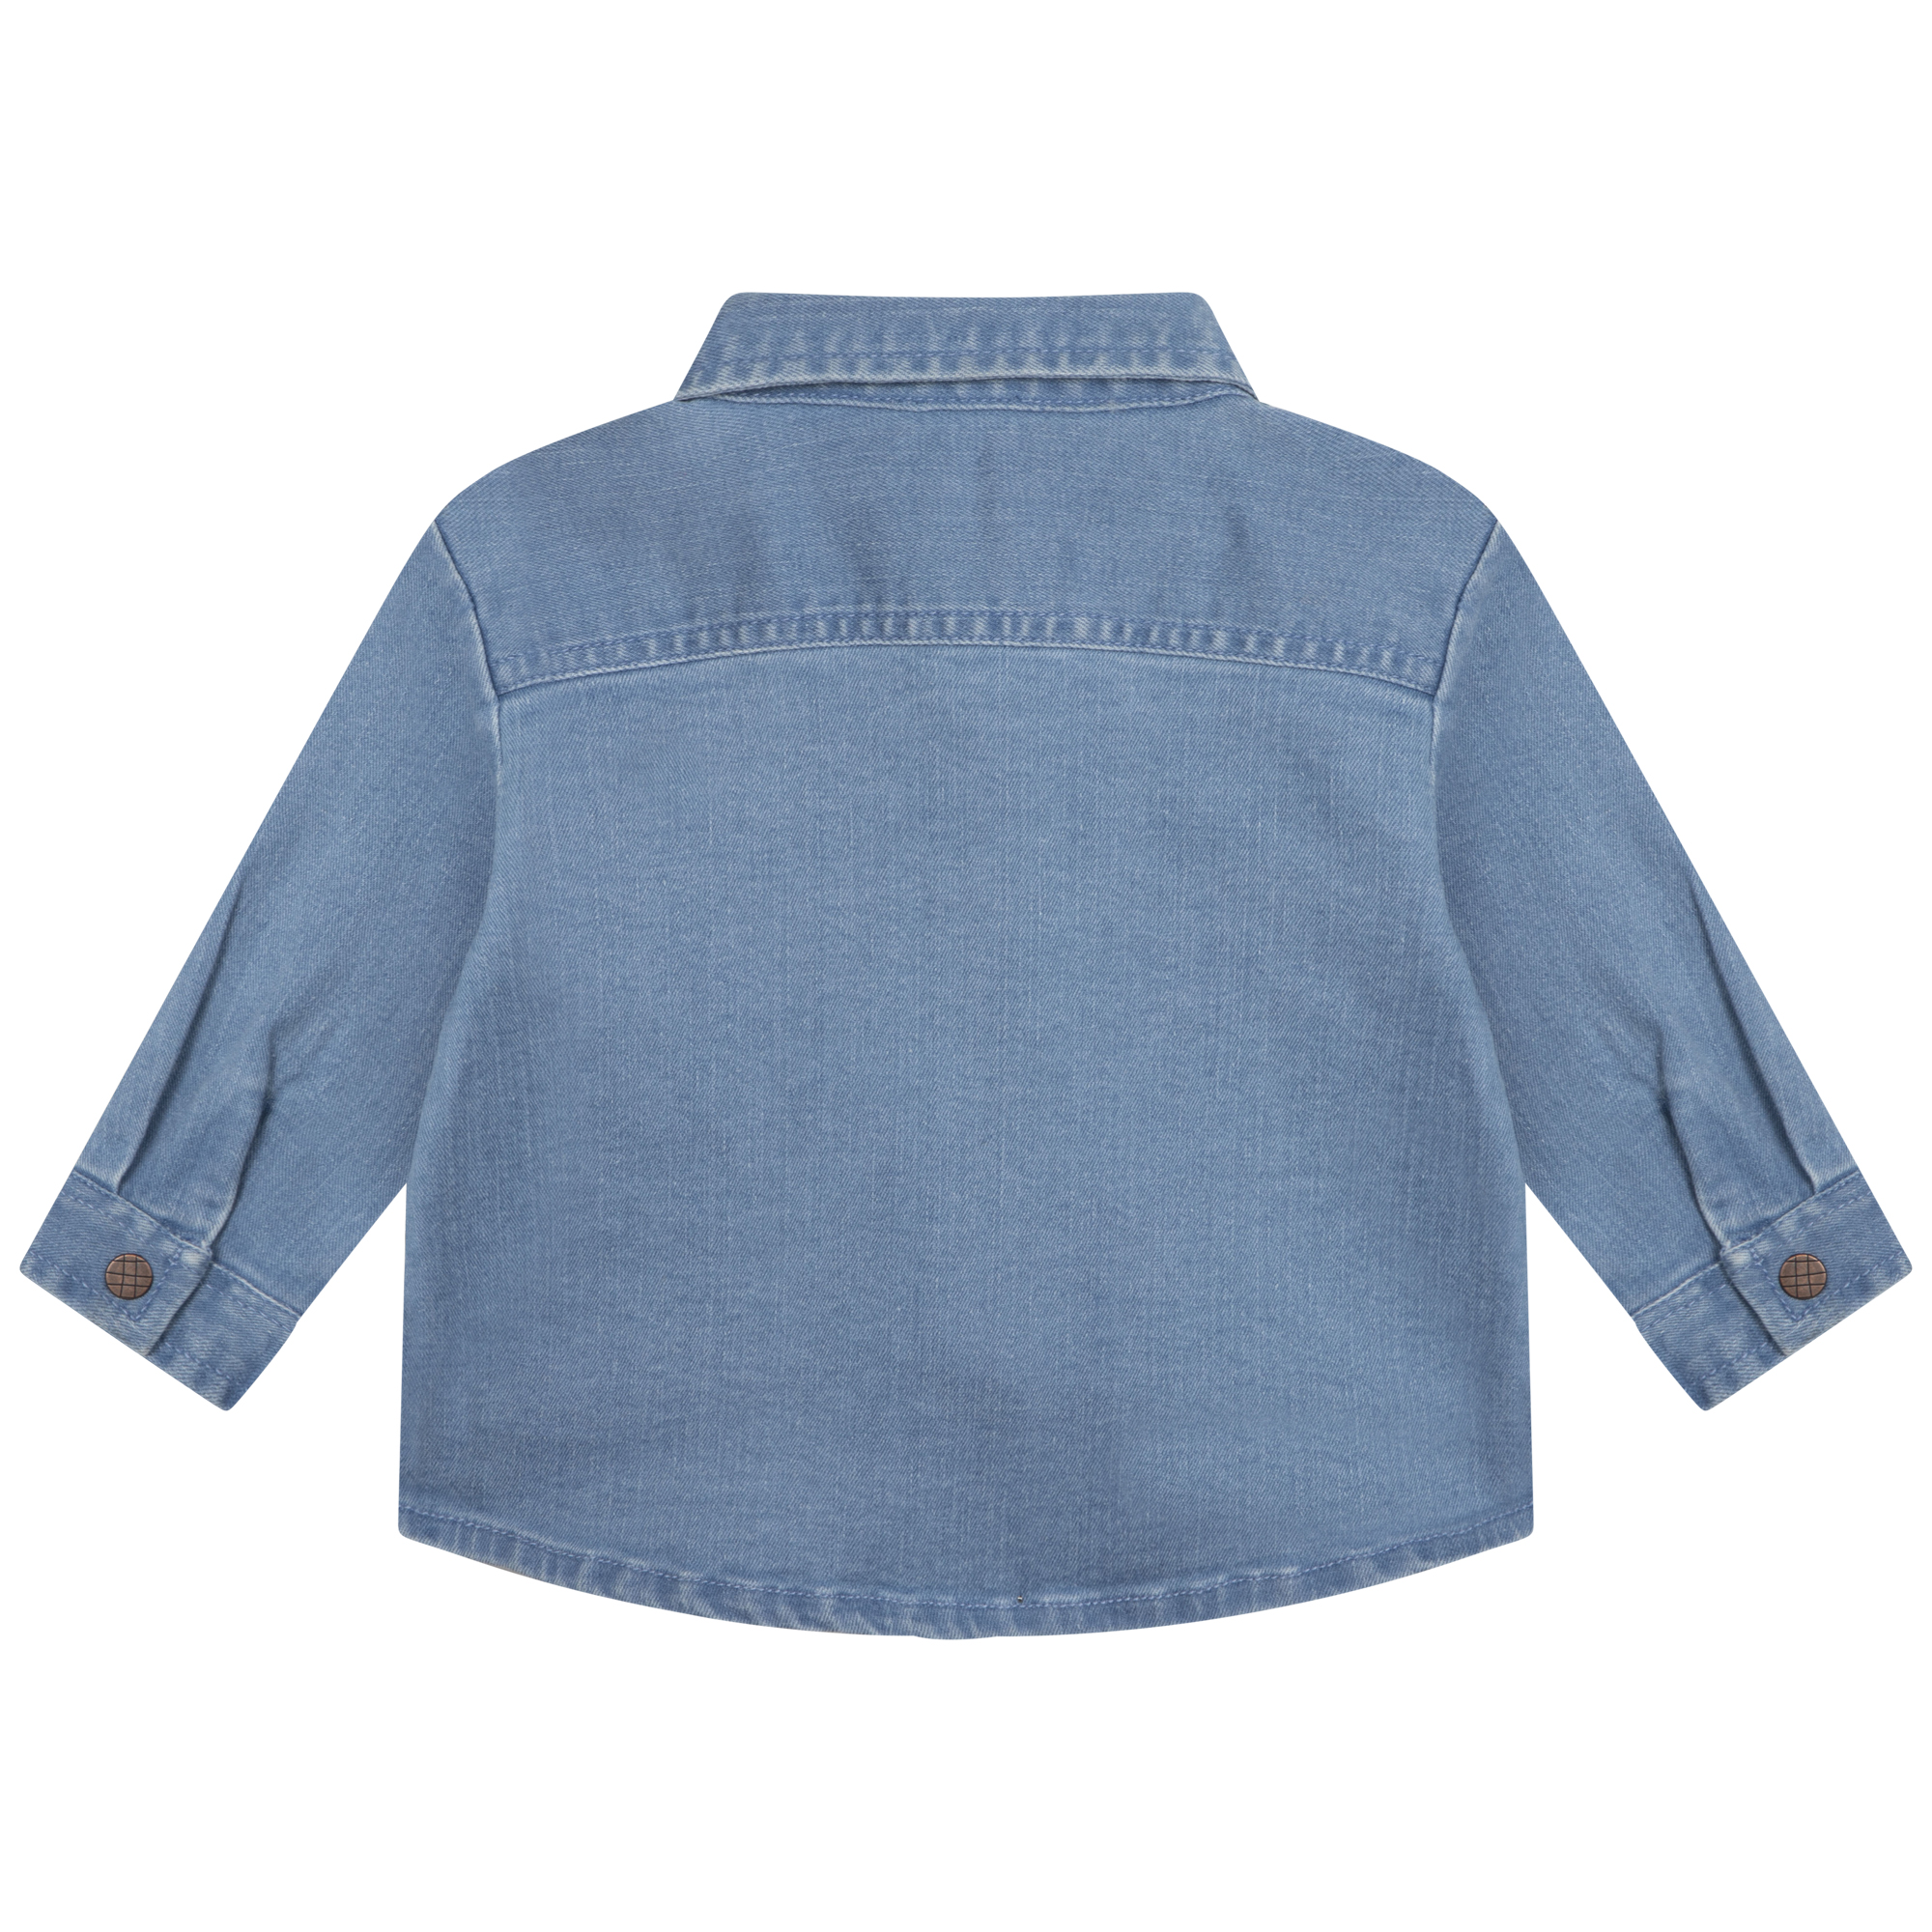 Jean shirt with press studs CARREMENT BEAU for BOY